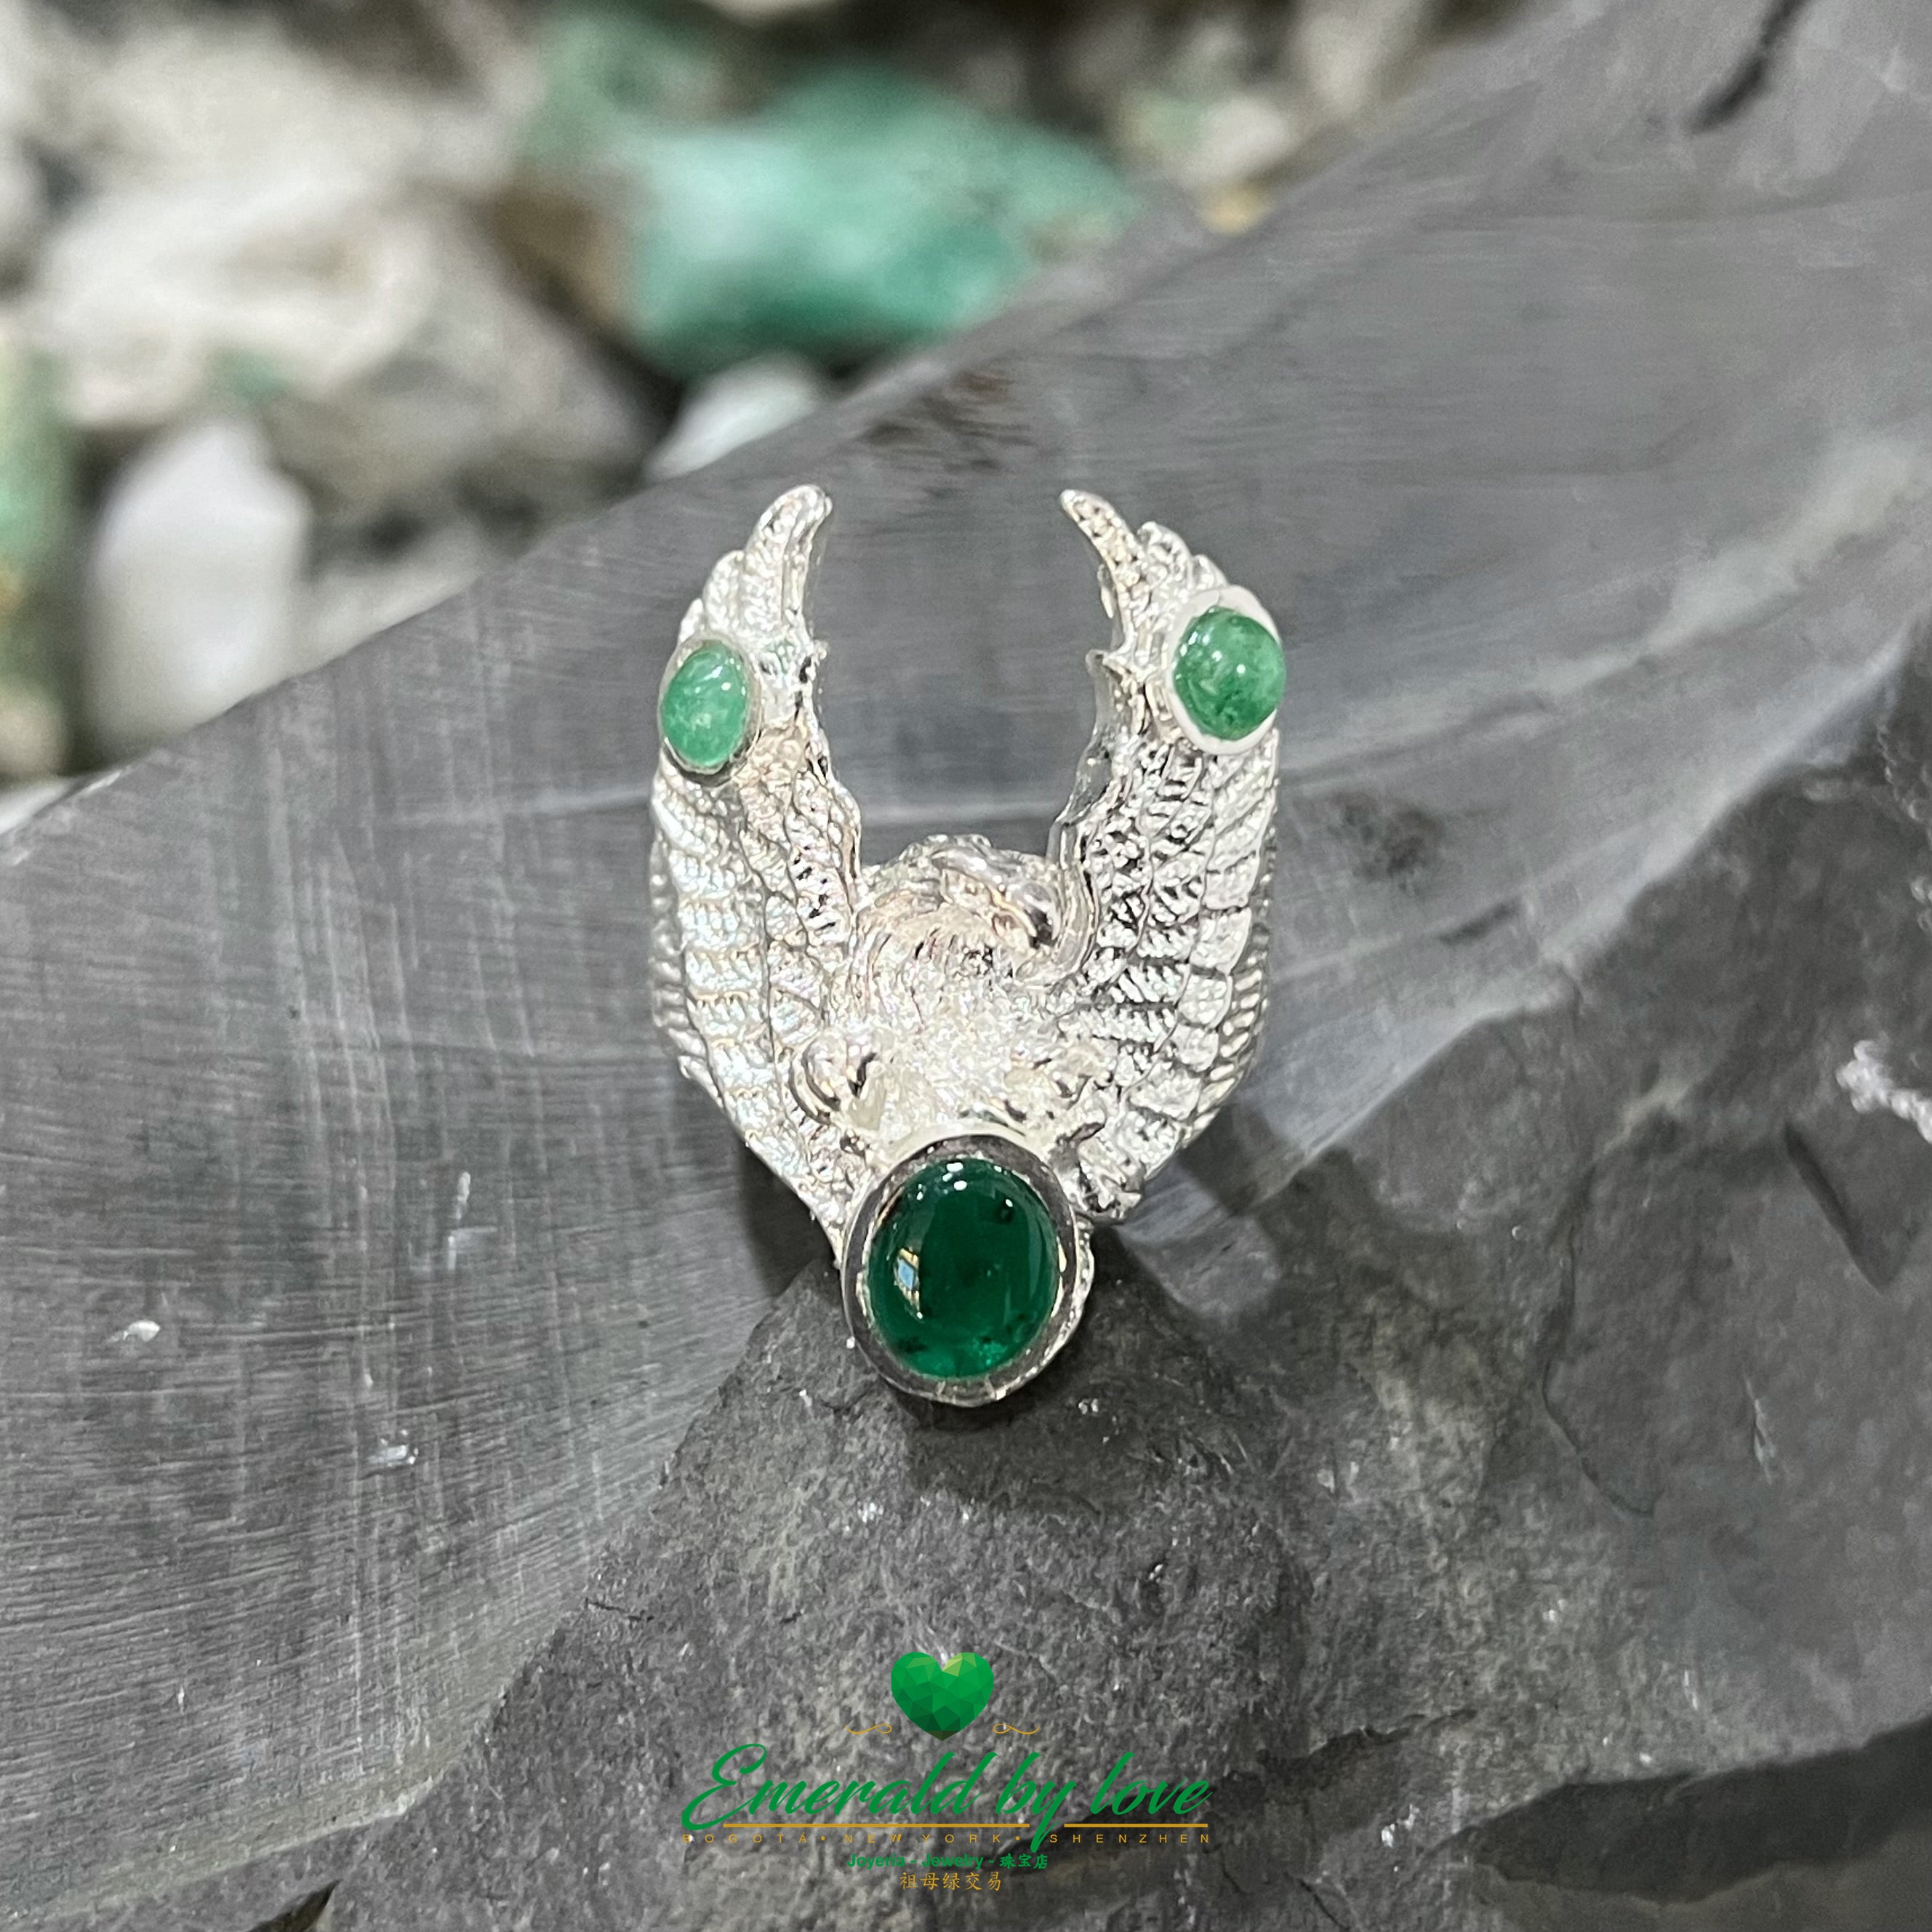 Eagle-Shaped Men's Ring with Cabochon Emerald